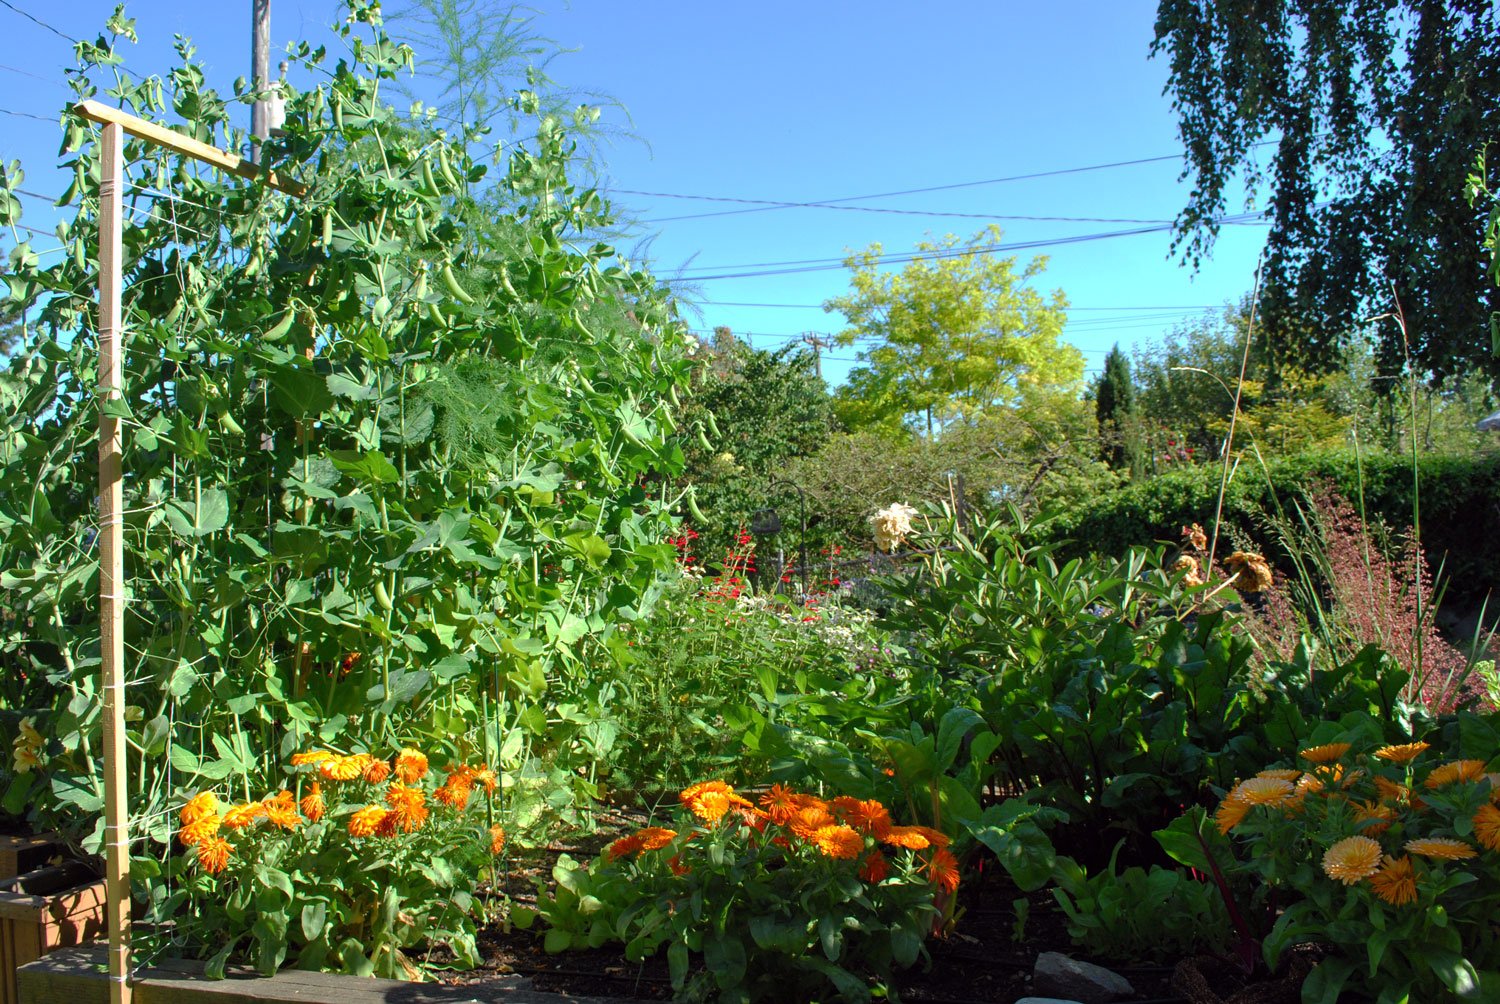 Image of Cosmos and squash companion planting